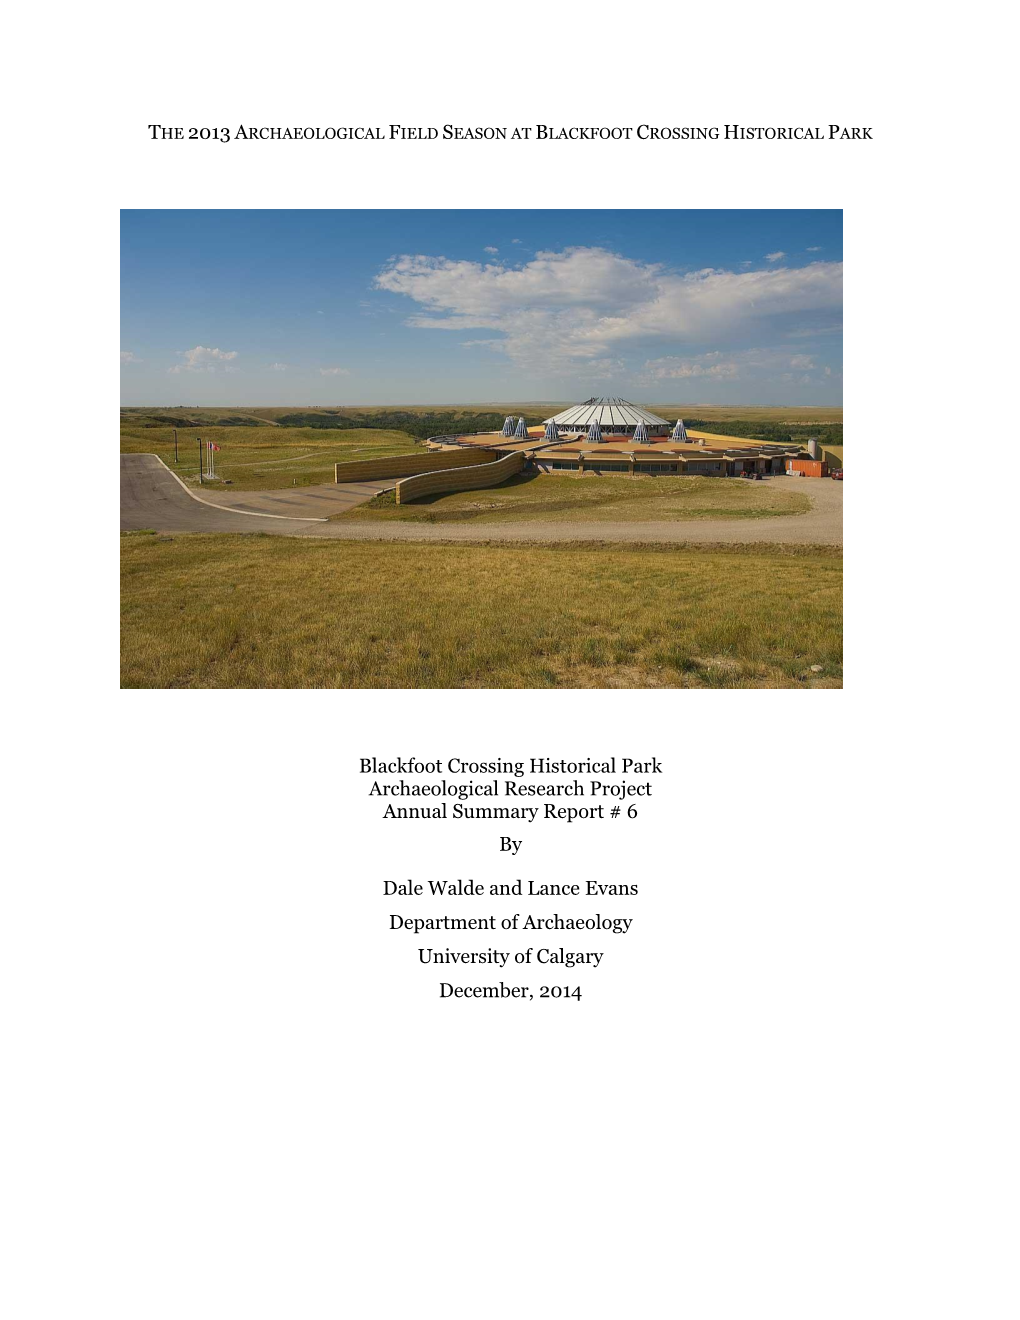 Blackfoot Crossing Historical Park Archaeological Research Project Annual Summary Report # 6 By